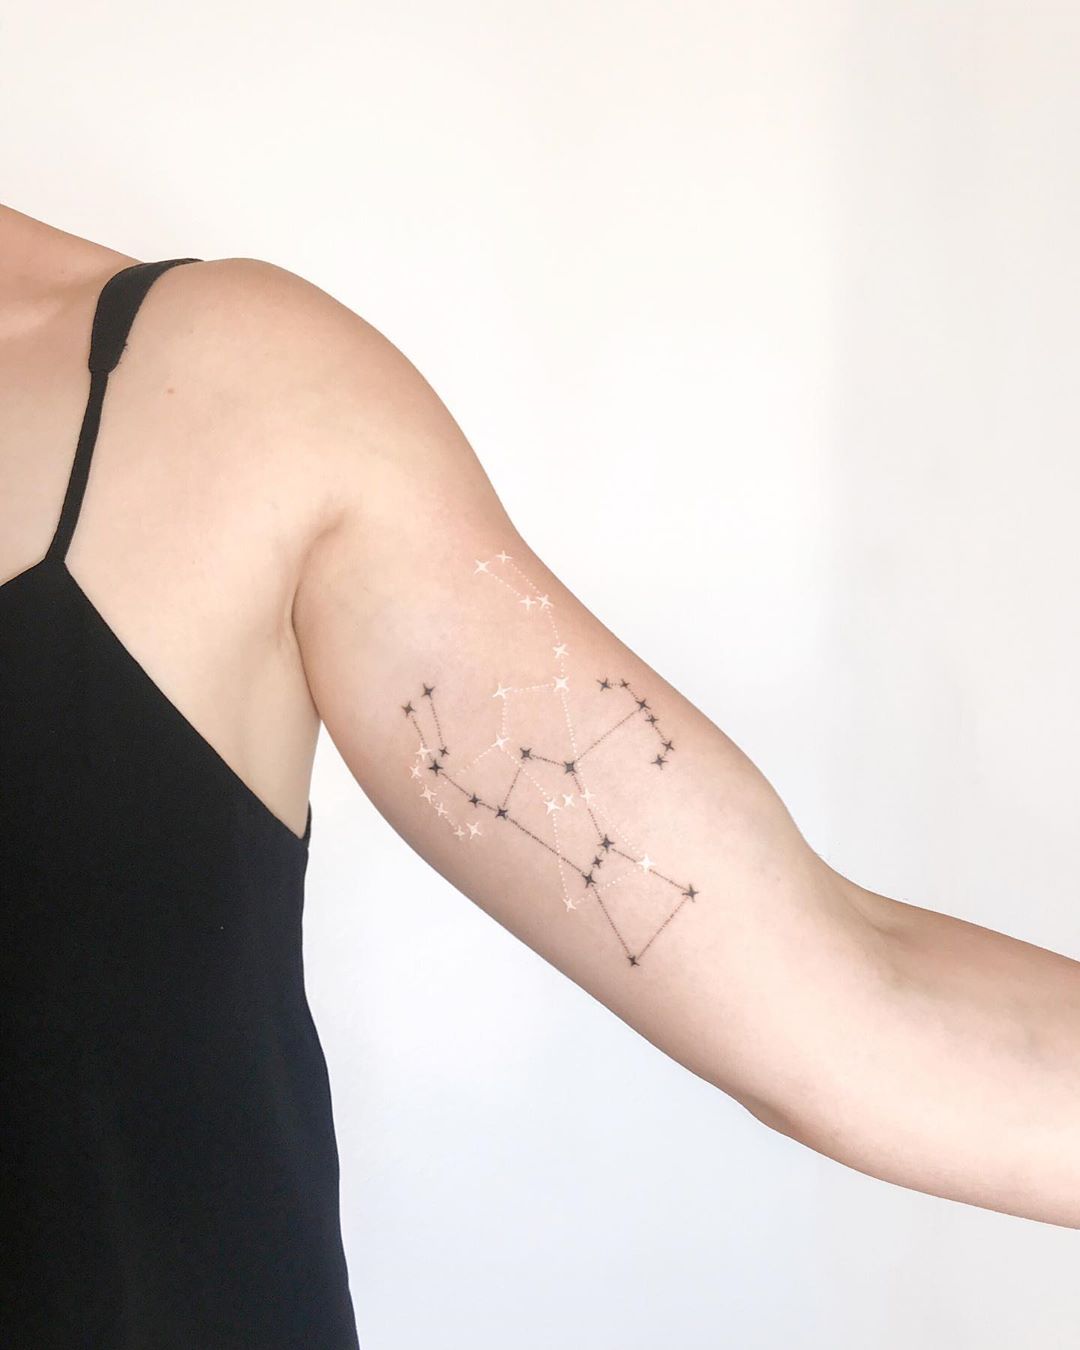 Orion constellation tattoo by Ann Gilberg - Tattoogrid.net